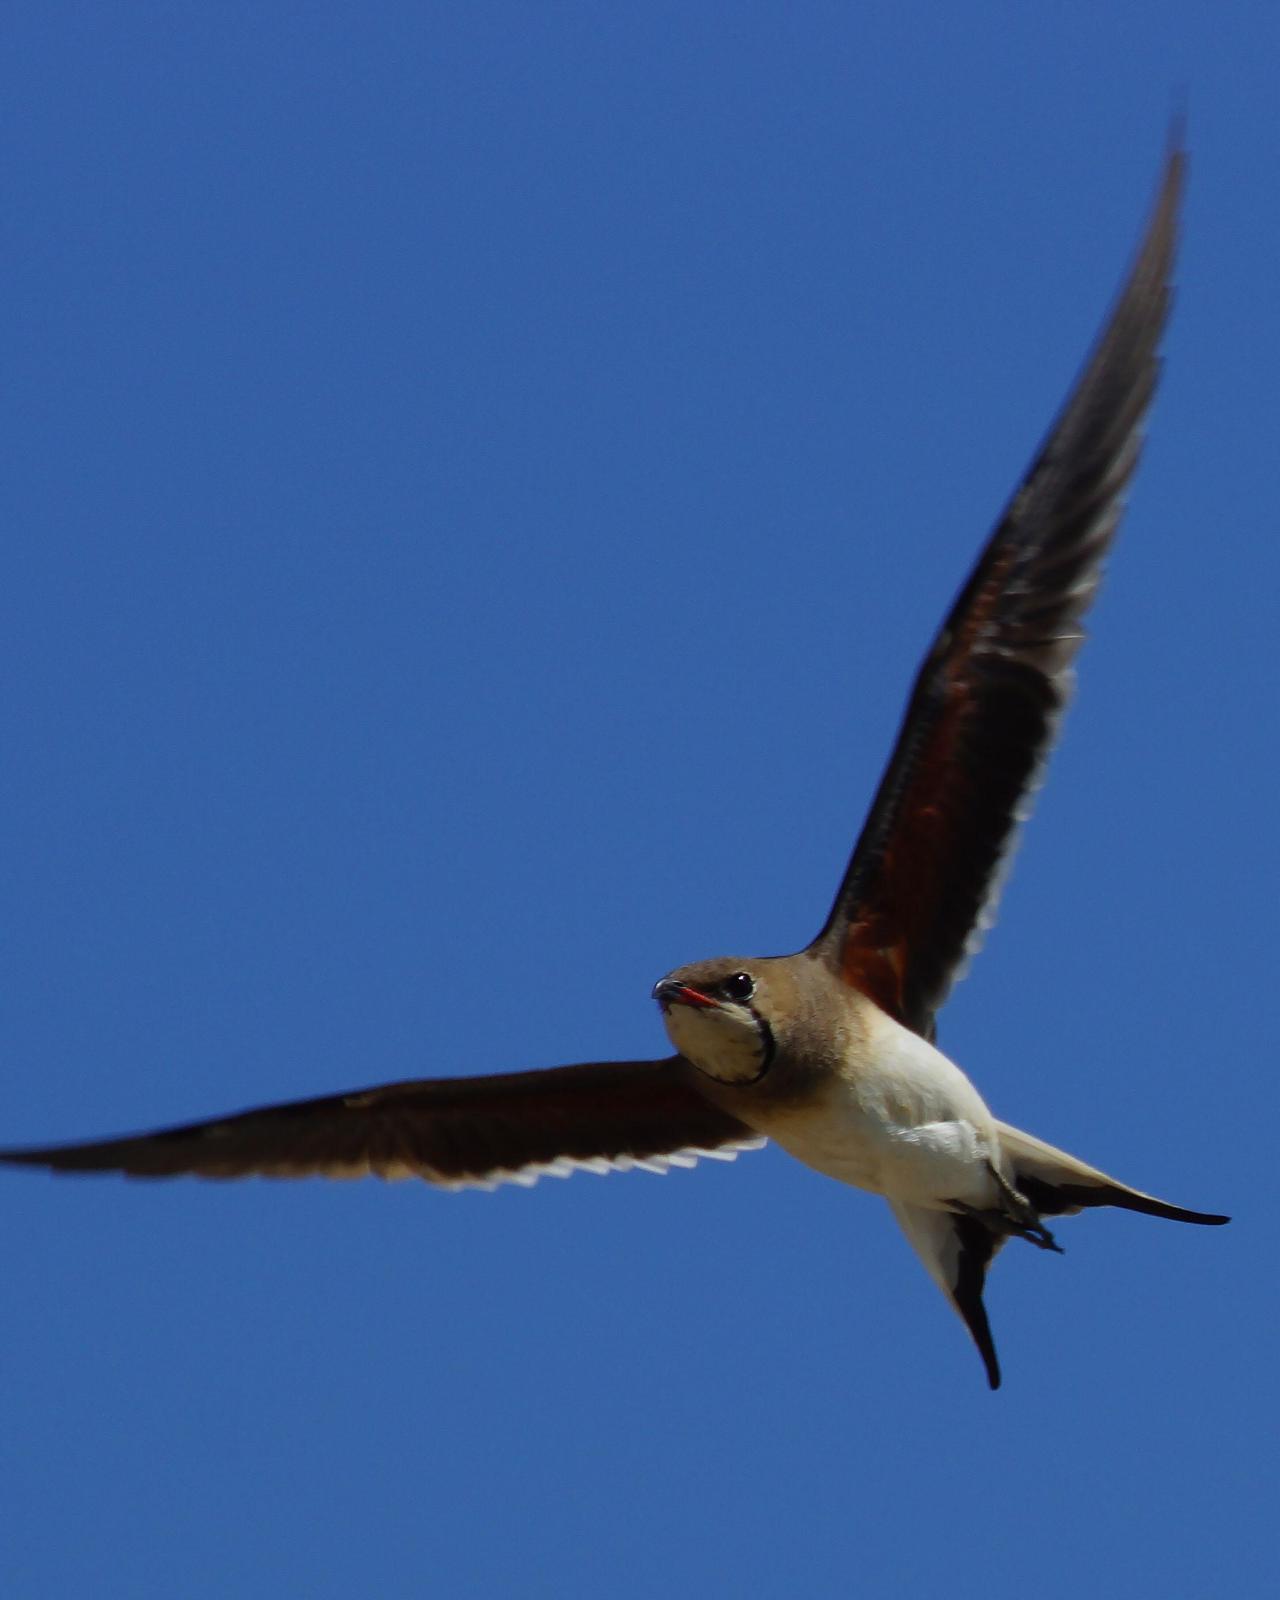 Collared Pratincole Photo by Steve Percival